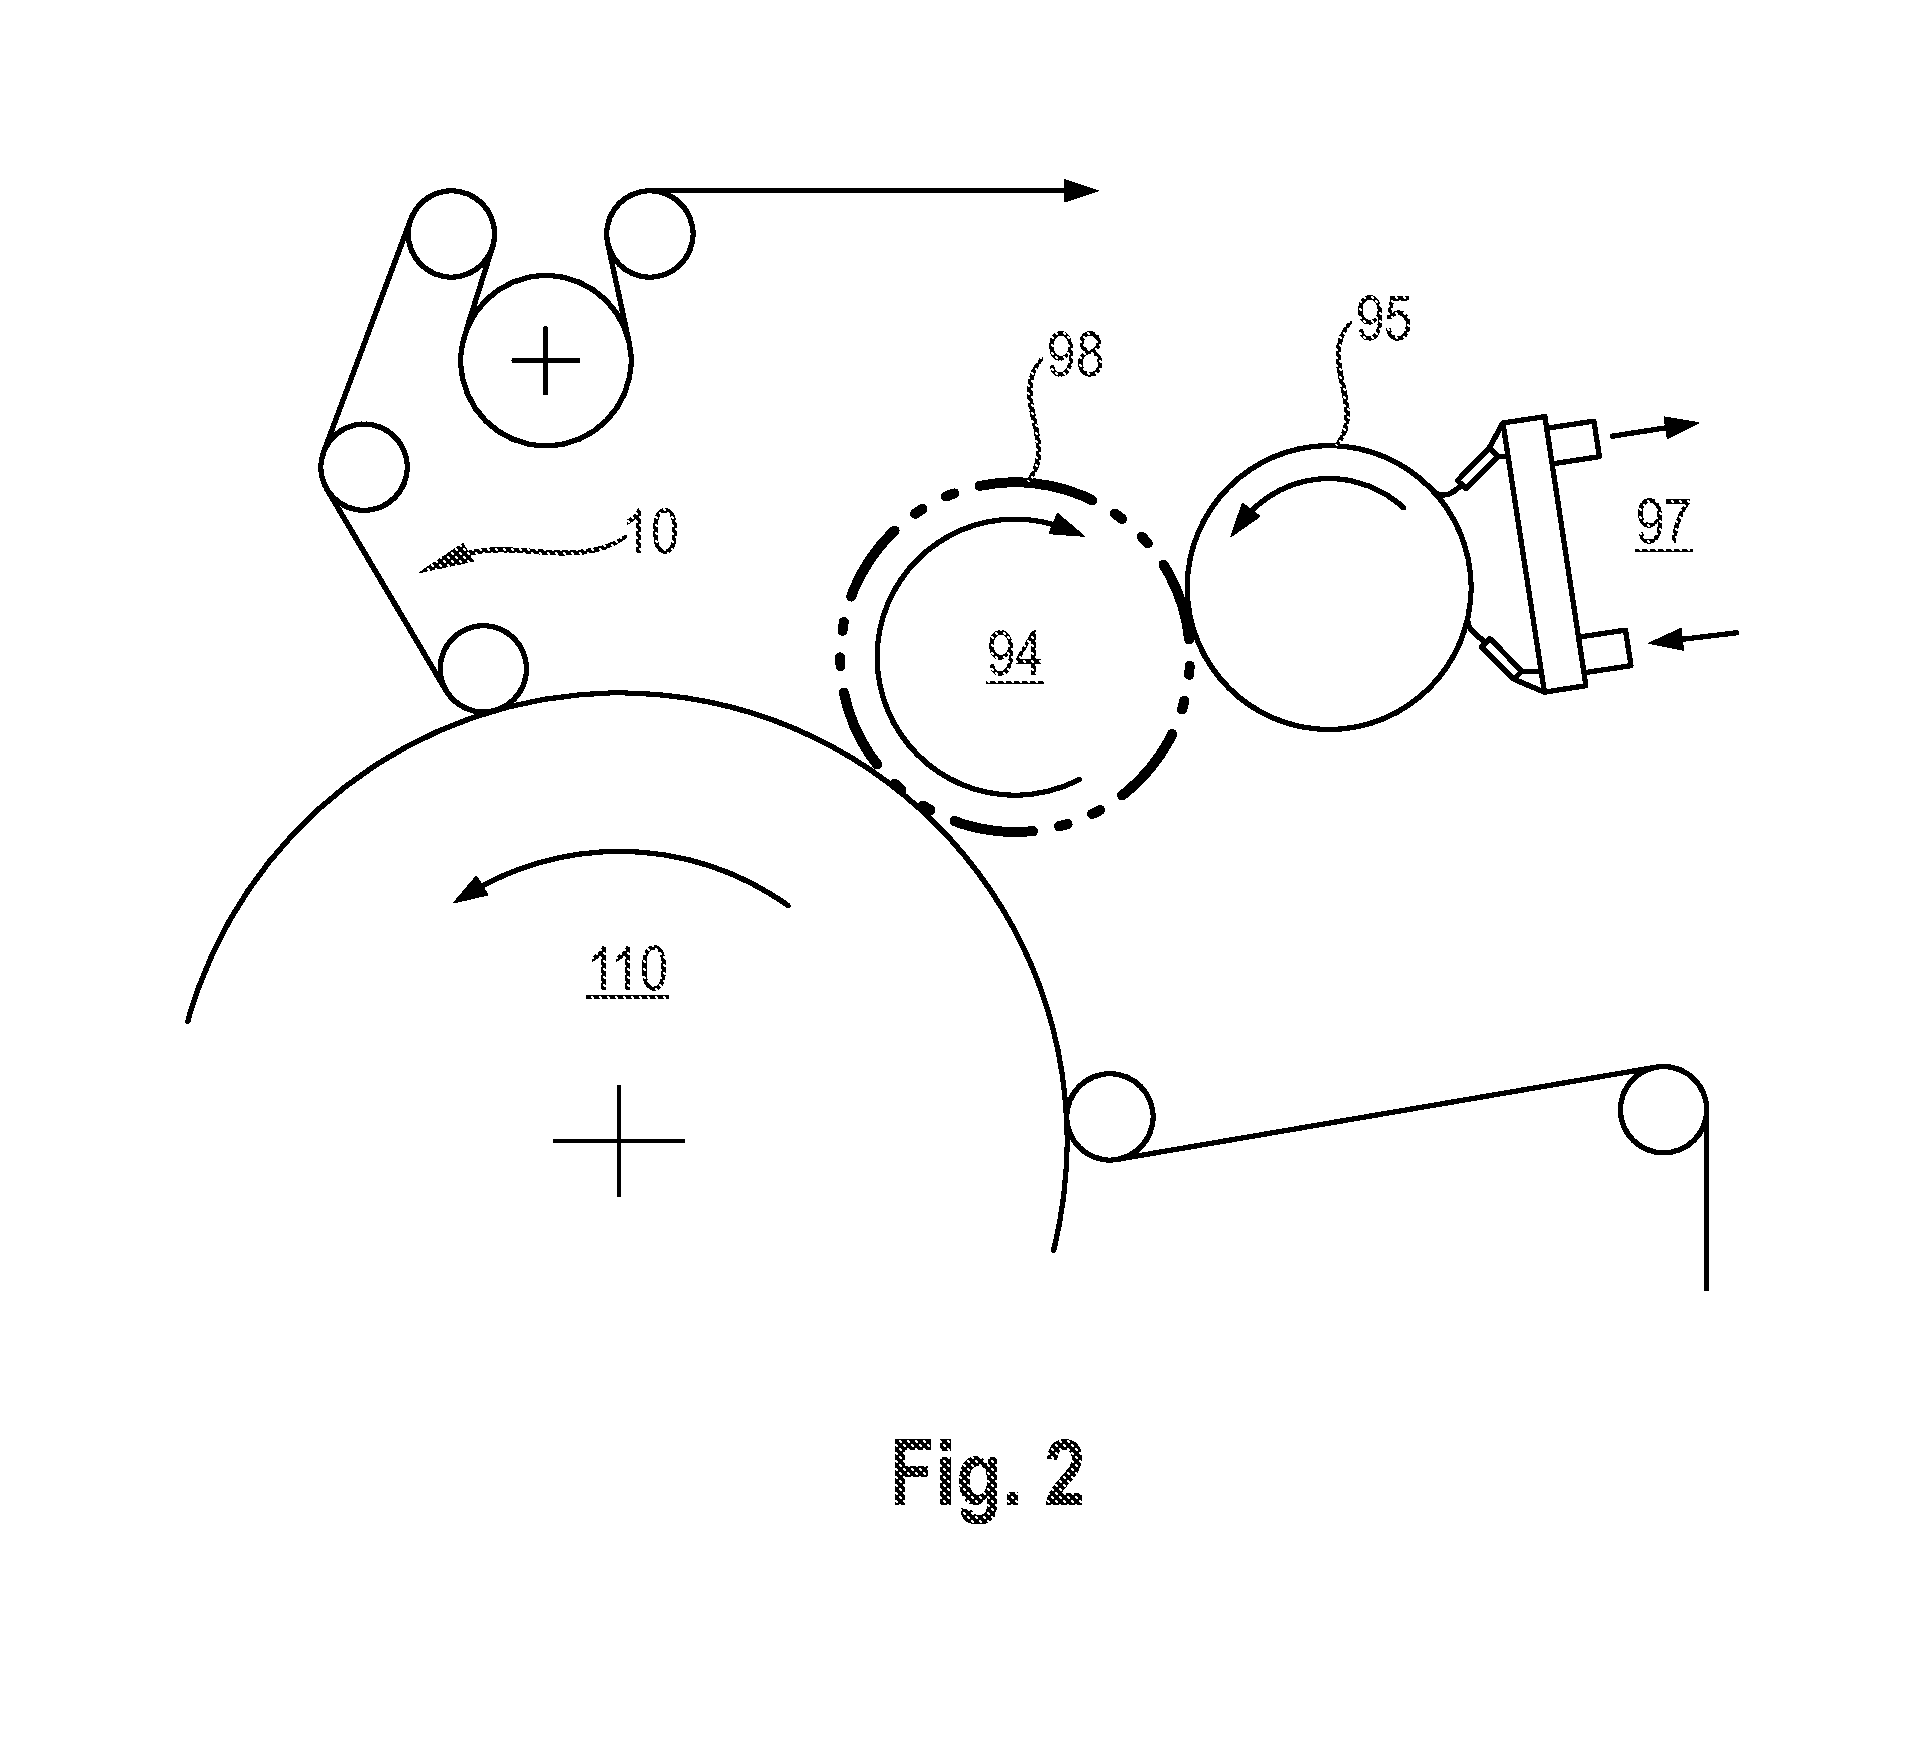 Apparatus to print on water-soluble film